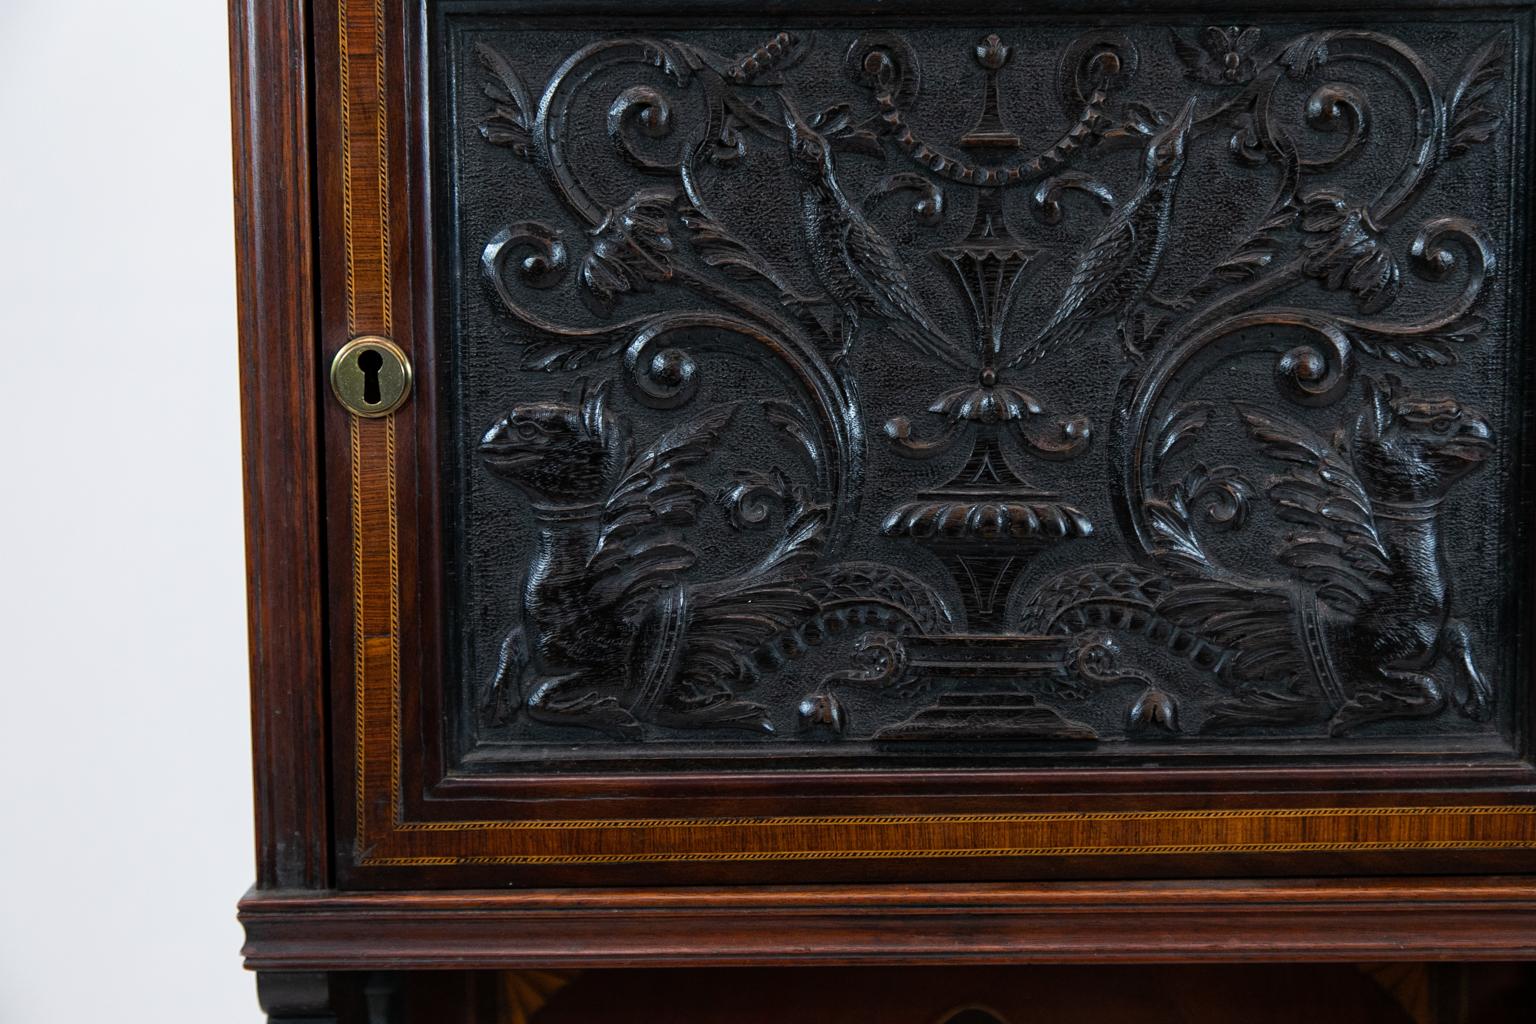 English carved inlaid cabinet is carved with birds and floral arabesques. The upper door is crossbanded with ebony, boxwood, and sandalwood inlay. The lower panel is inlaid with a classical urn and quarter fans. The top section is supported by